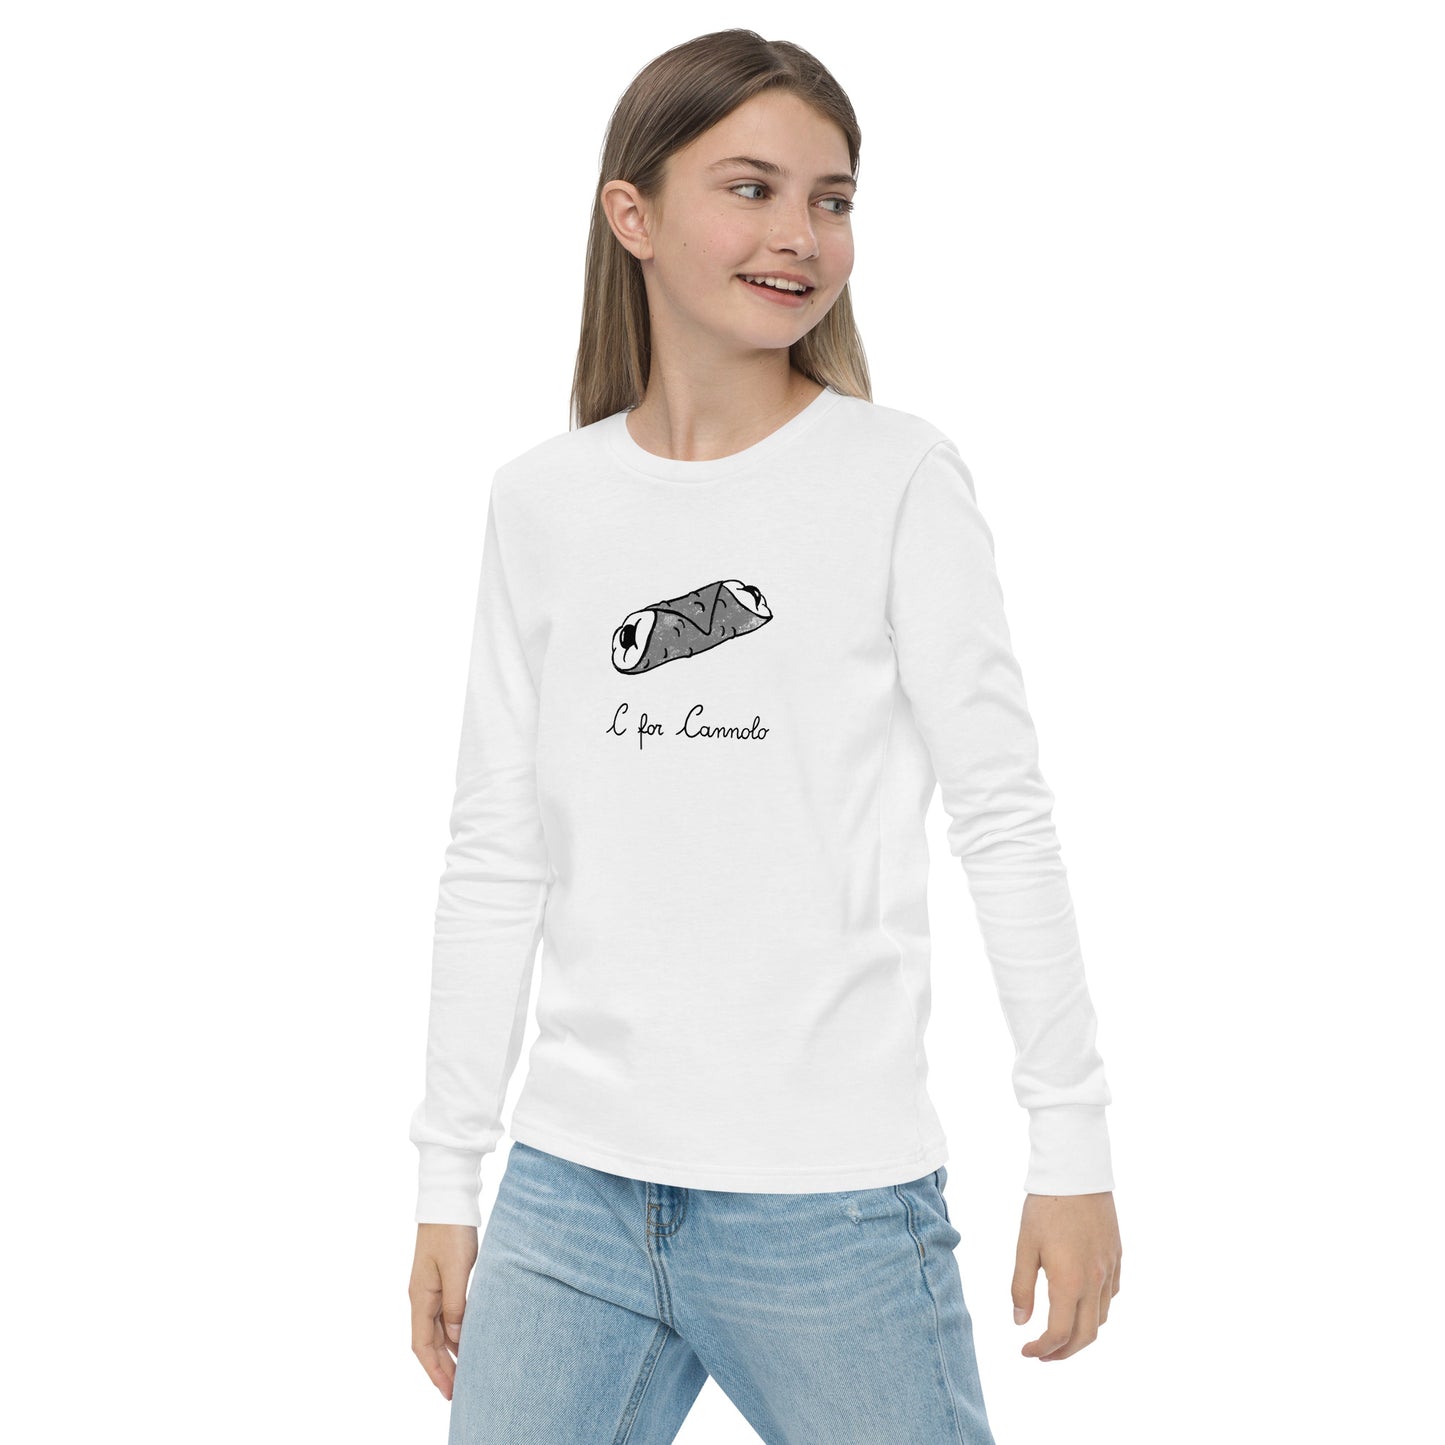 Cannolo on a youth long sleeve tee